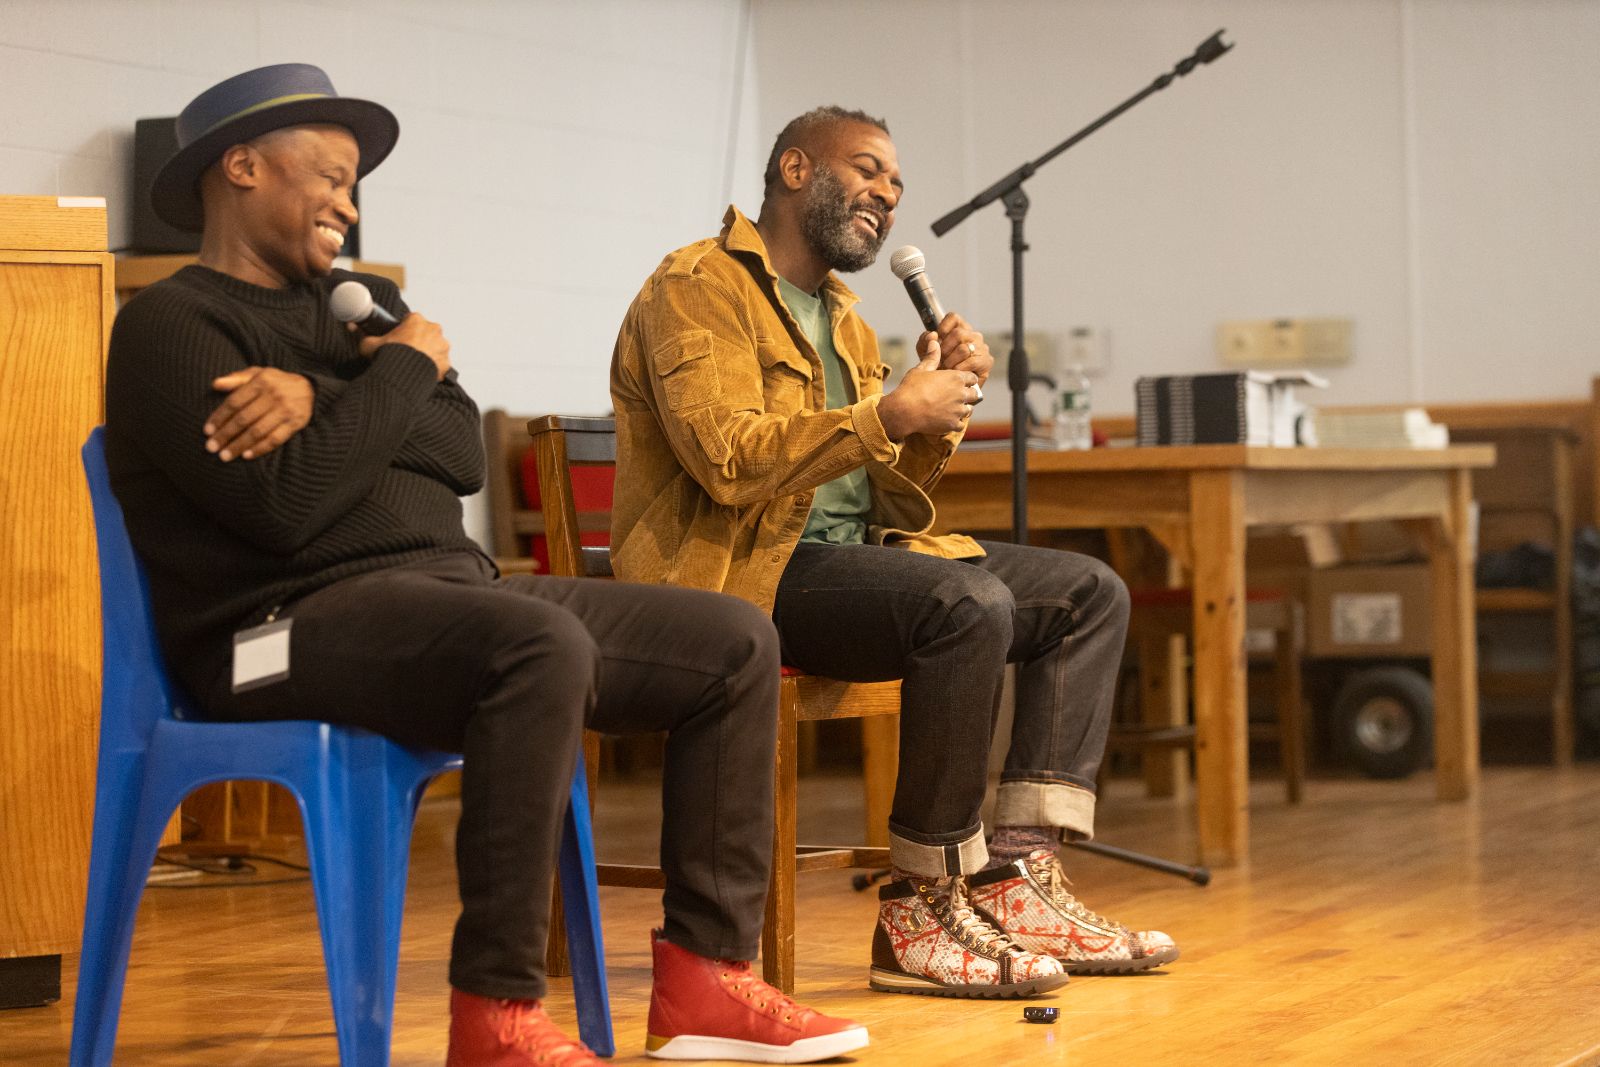 Freedom Reads Founder & CEO Reginald Dwayne Betts and University of New Haven Professor Randall Horton – both highly-regarded, award-winning poets – conduct a poetry reading in November 2023 at Carl Robinson Correctional Institution in Enfield, Connecticut.